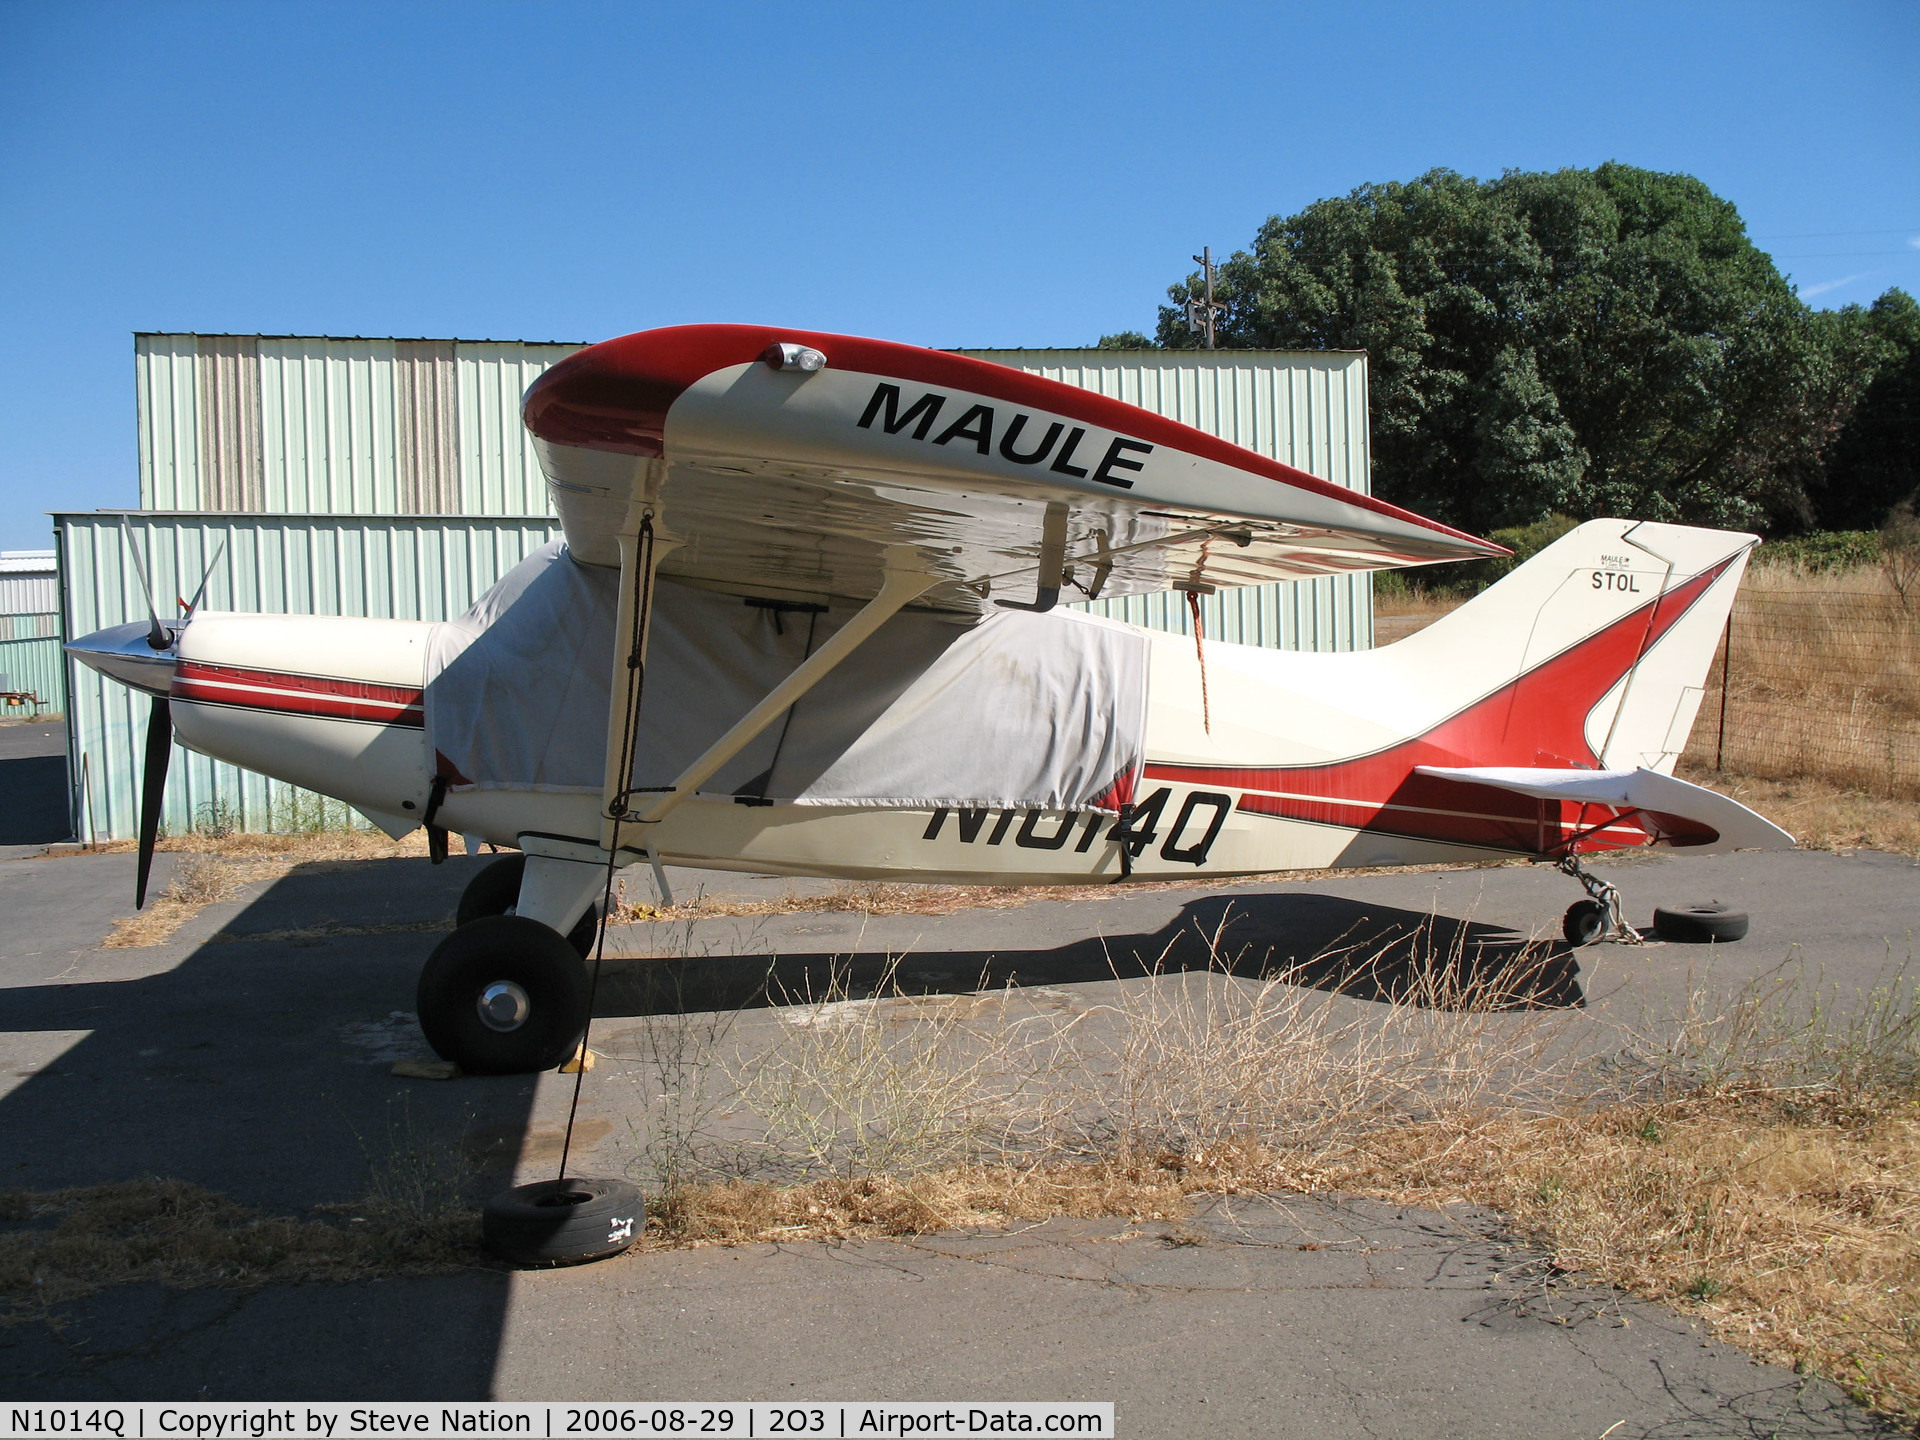 N1014Q, 1996 Maule M-7-235B Super Rocket C/N 23029C, Locally-based 1996 Maule M-7-235B @ Parrett Field, Angwin, CA (to new owner in Lava Rock springs, ID by March 2008)